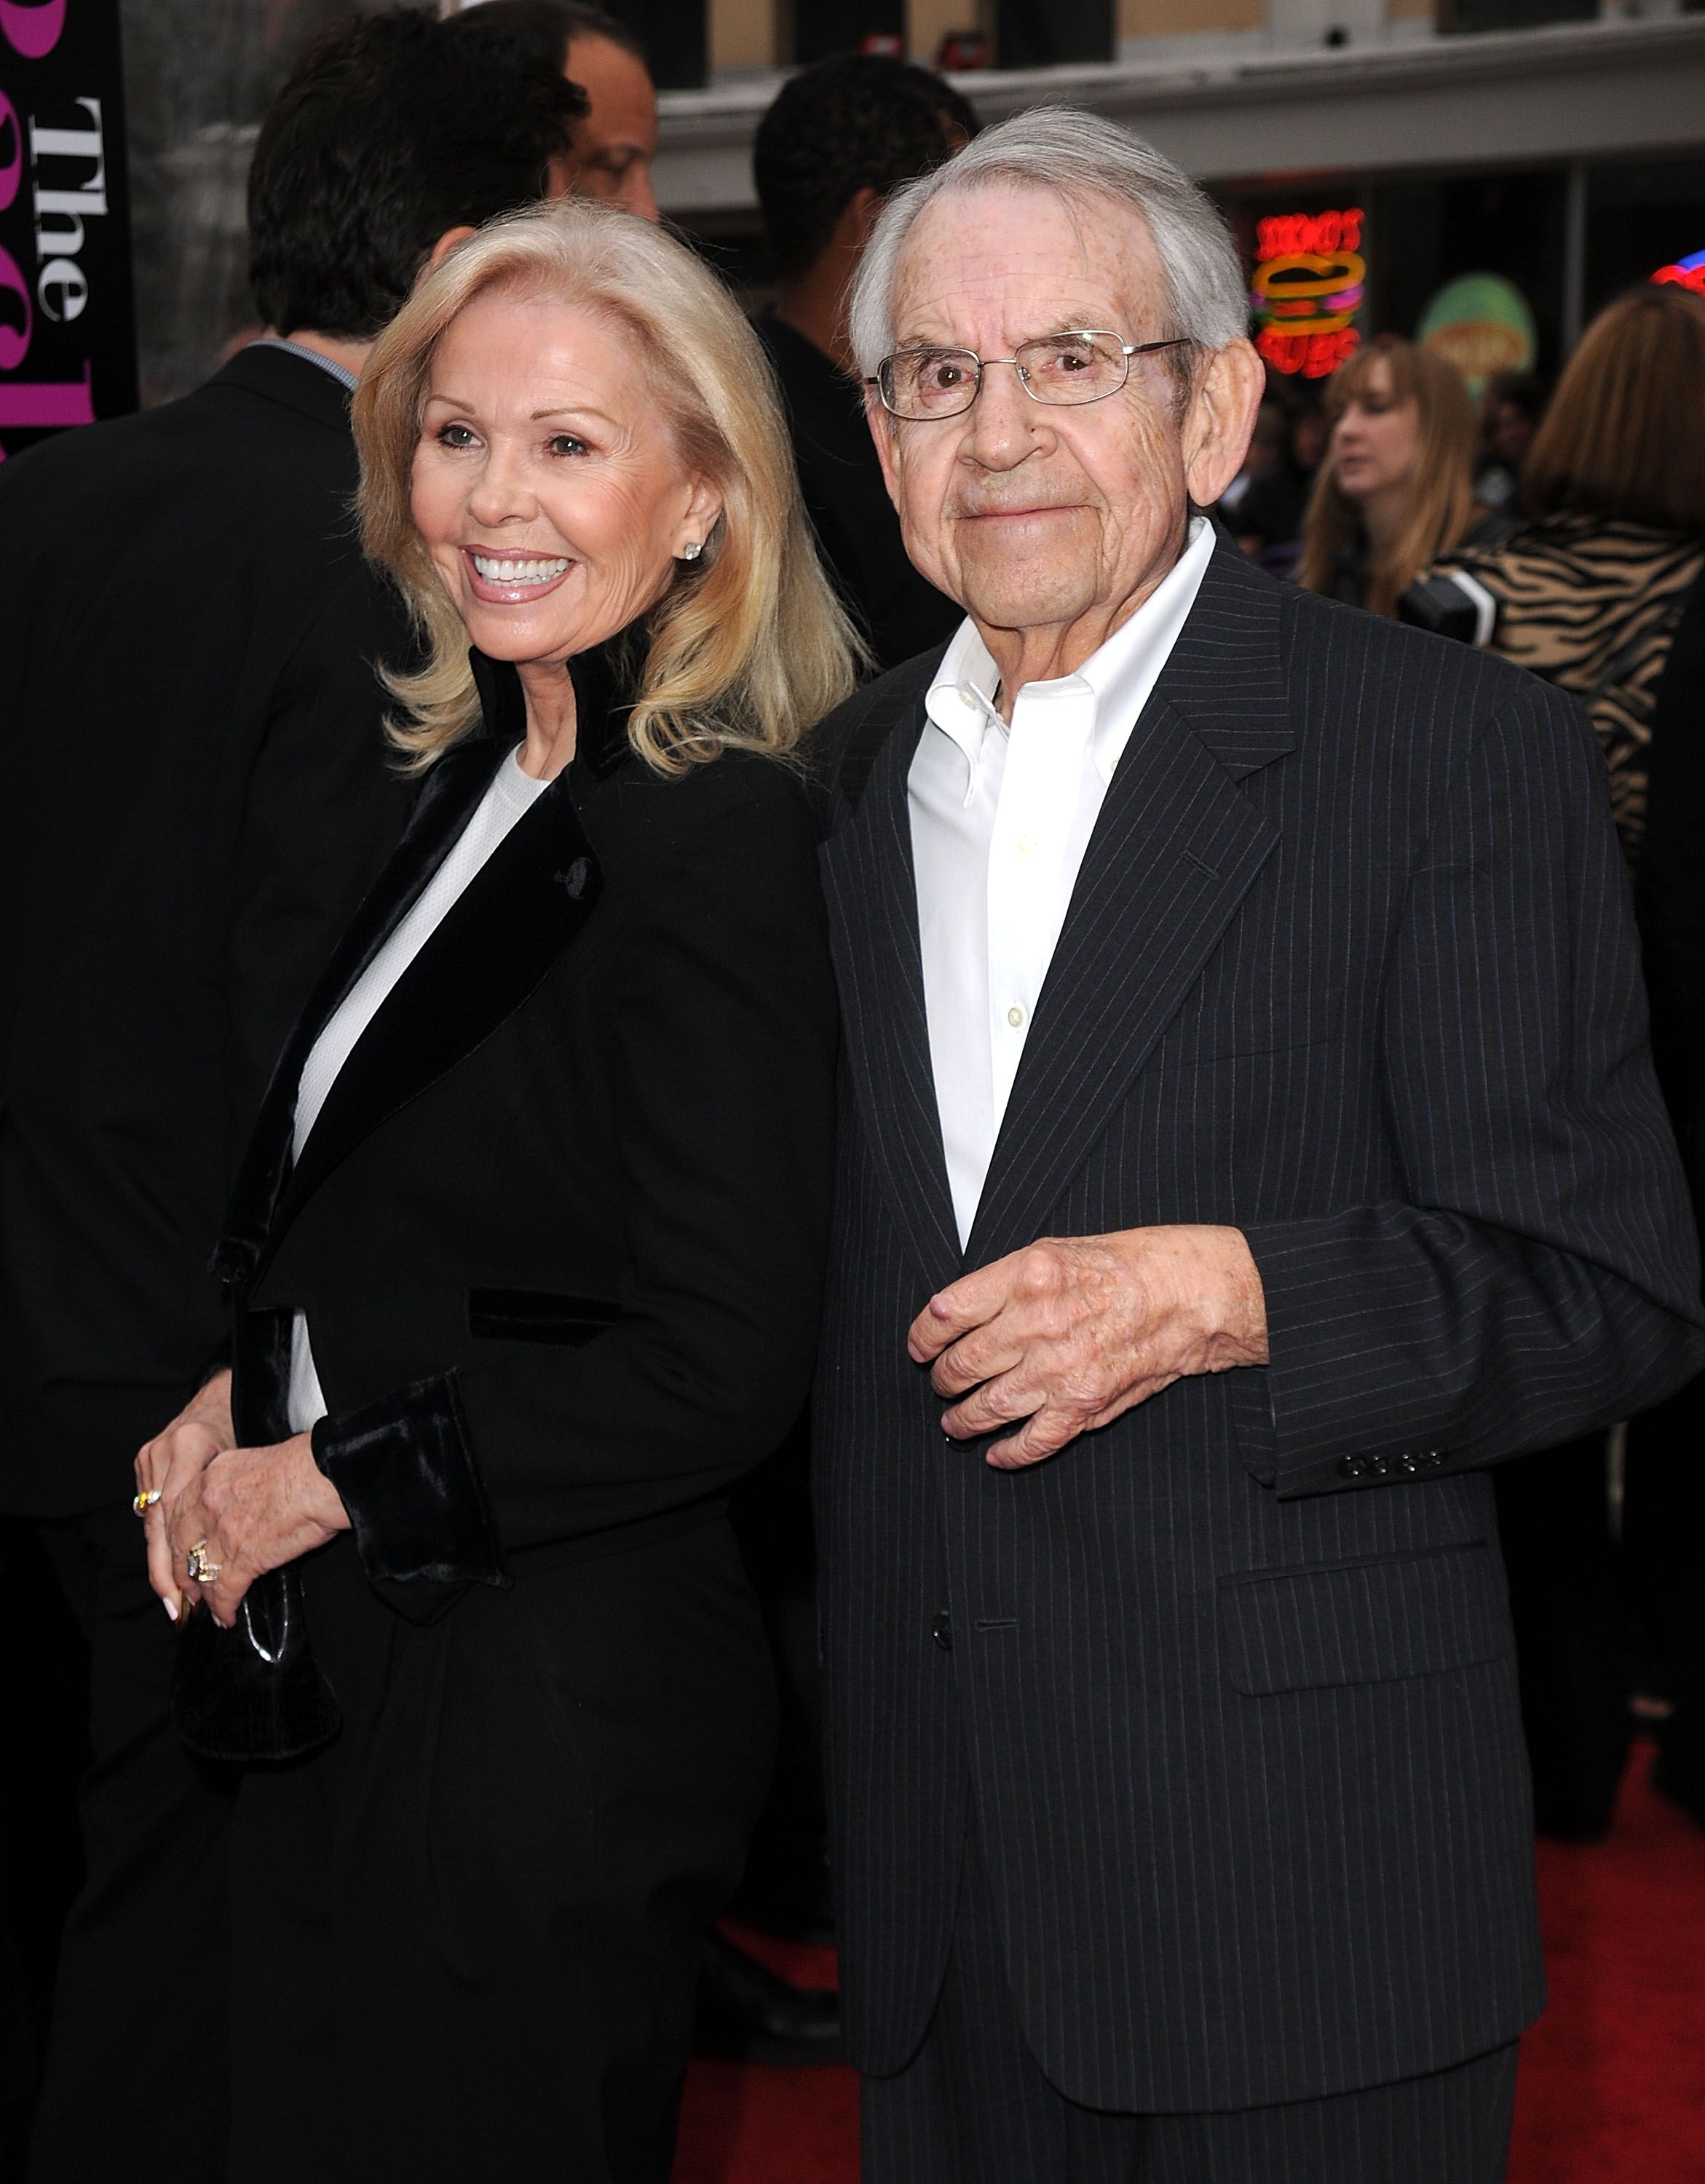 Tom Bosley and his wife actress Patricia Carr at at the premiere of 'The Back-Up Plan' in 2010 | Source: Getty Images